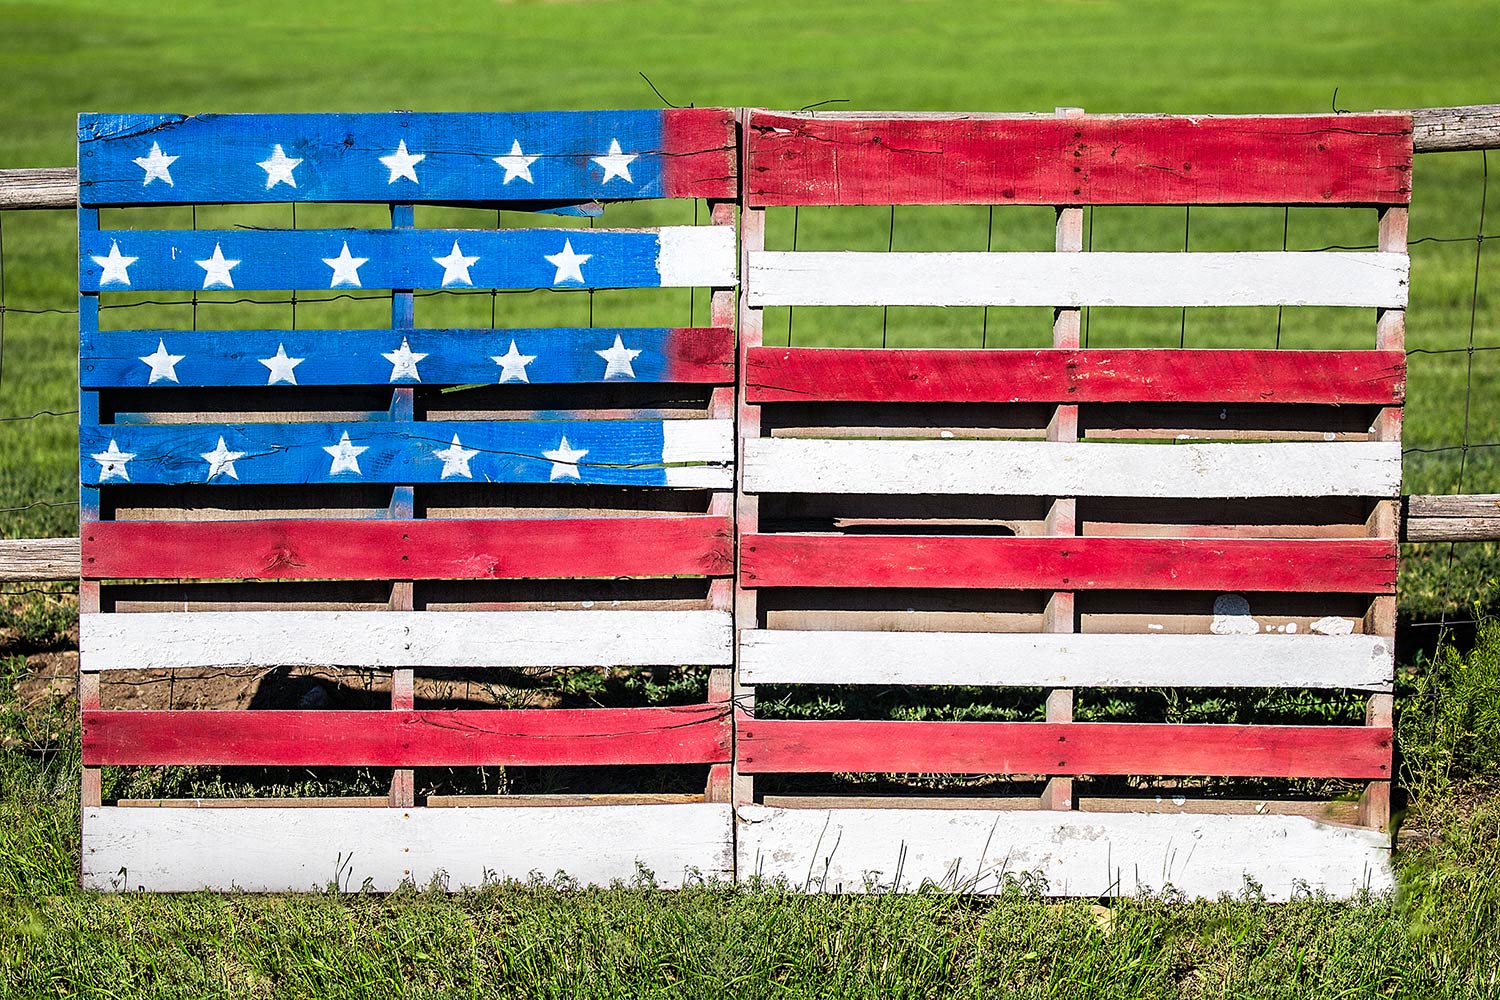 Wooden pallets repurposed and painted with the American flag celebrate the American spirit near White Sulphur Springs, Montana.&nbsp;→ Buy a Print